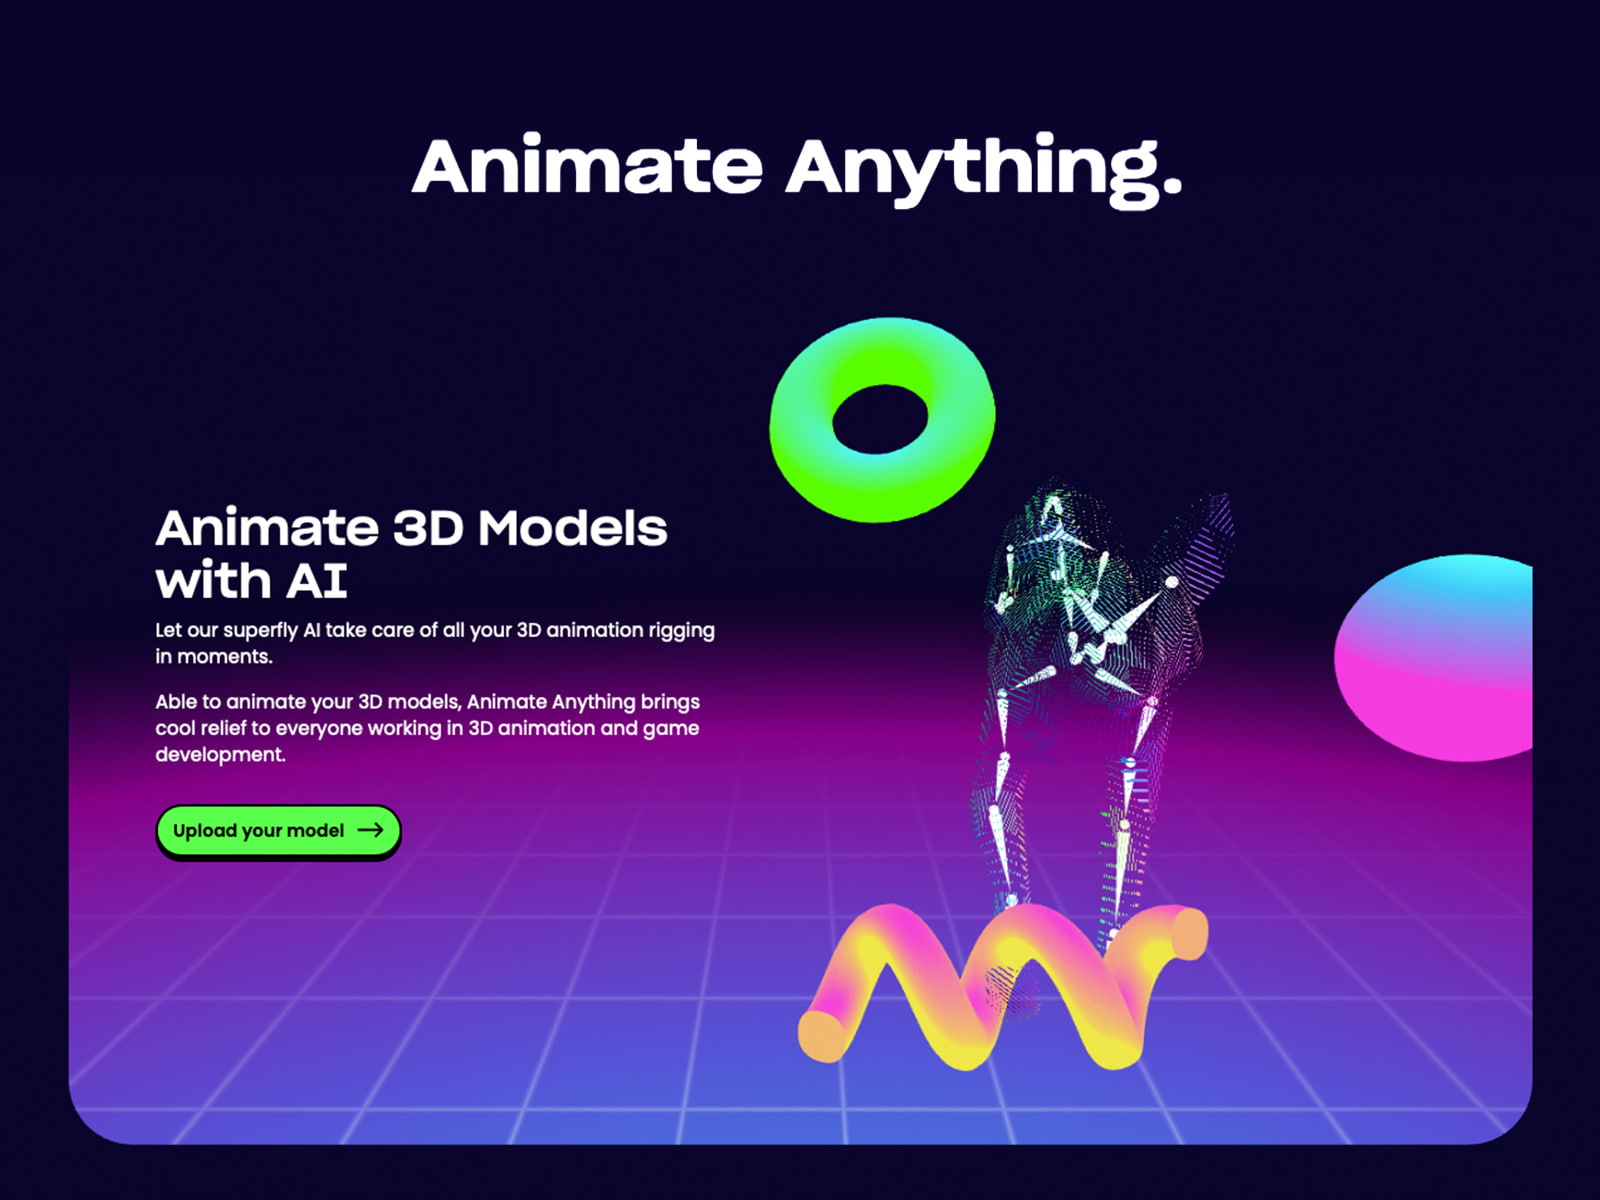 Animate Anything - 3D Animations